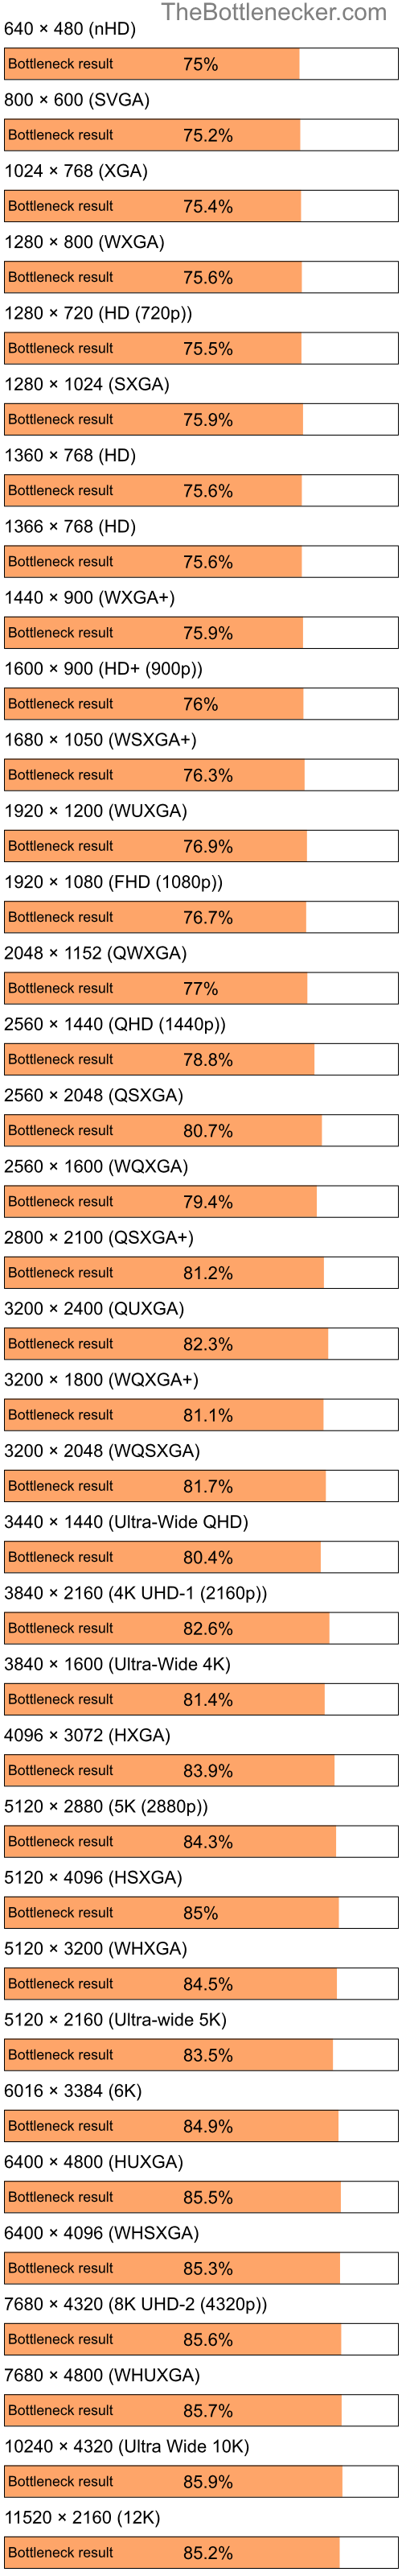 Bottleneck results by resolution for Intel Celeron and NVIDIA GeForce 7300 SE in7 Days to Die